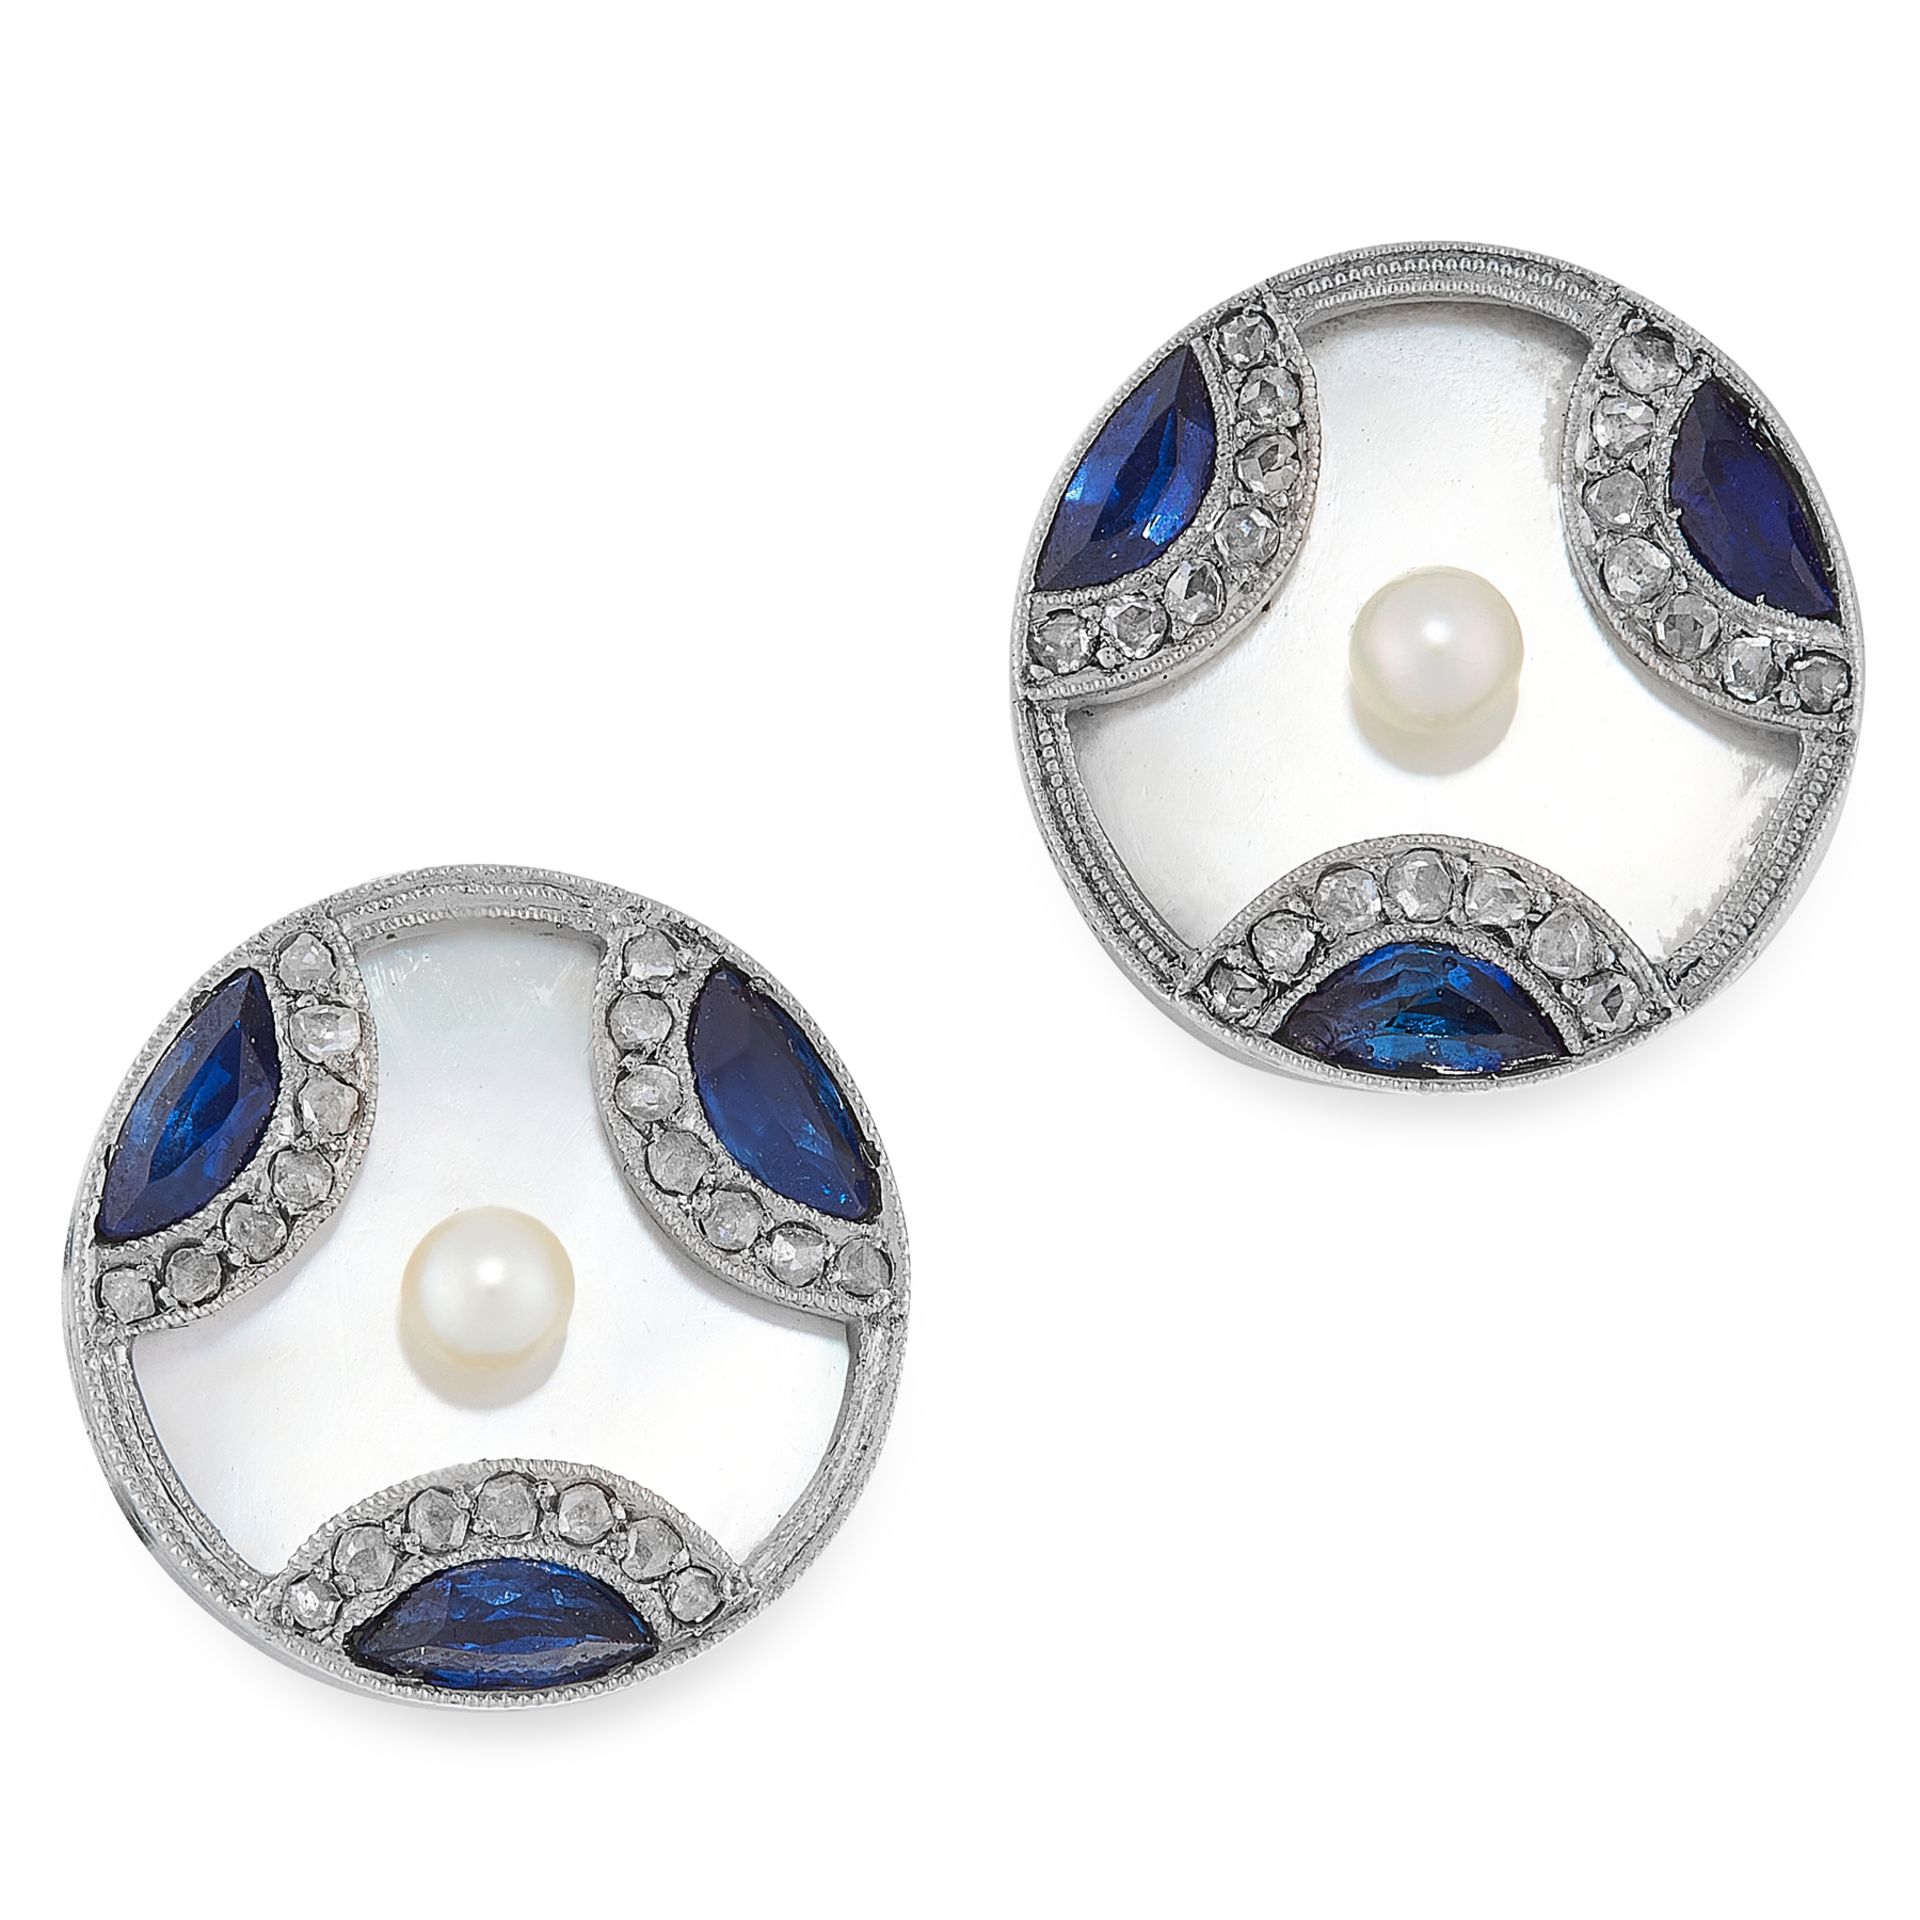 A PAIR OF ART DECO SAPPHIRE, MOTHER OF PEARL, PEARL AND DIAMOND EARRINGS in platinum, each of